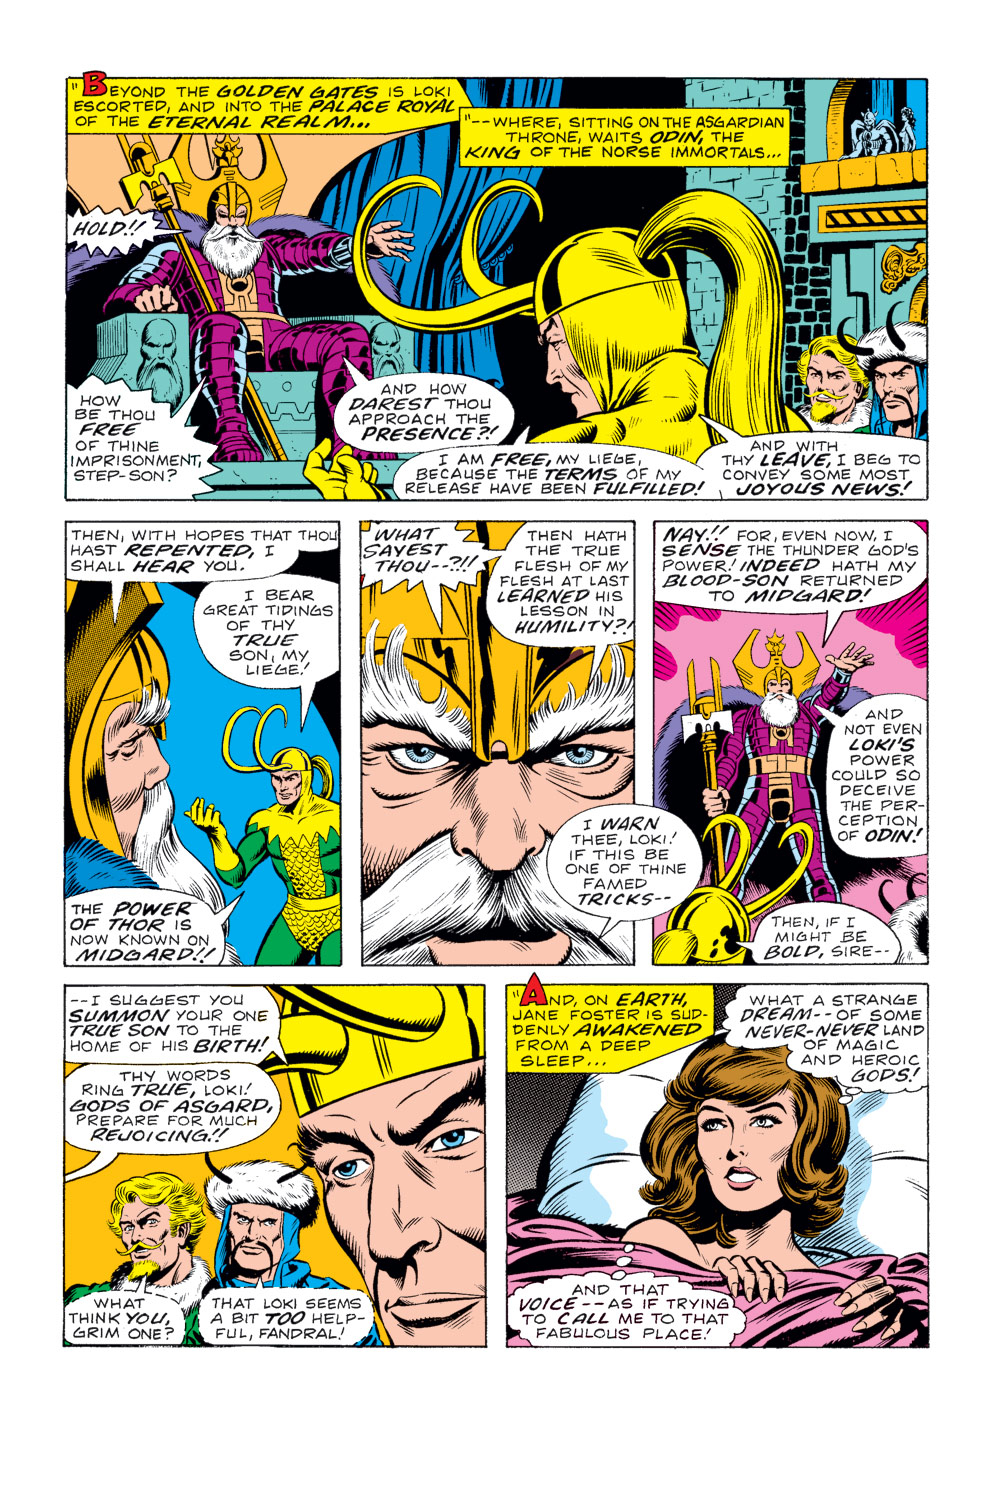 What If? (1977) issue 10 - Jane Foster had found the hammer of Thor - Page 17